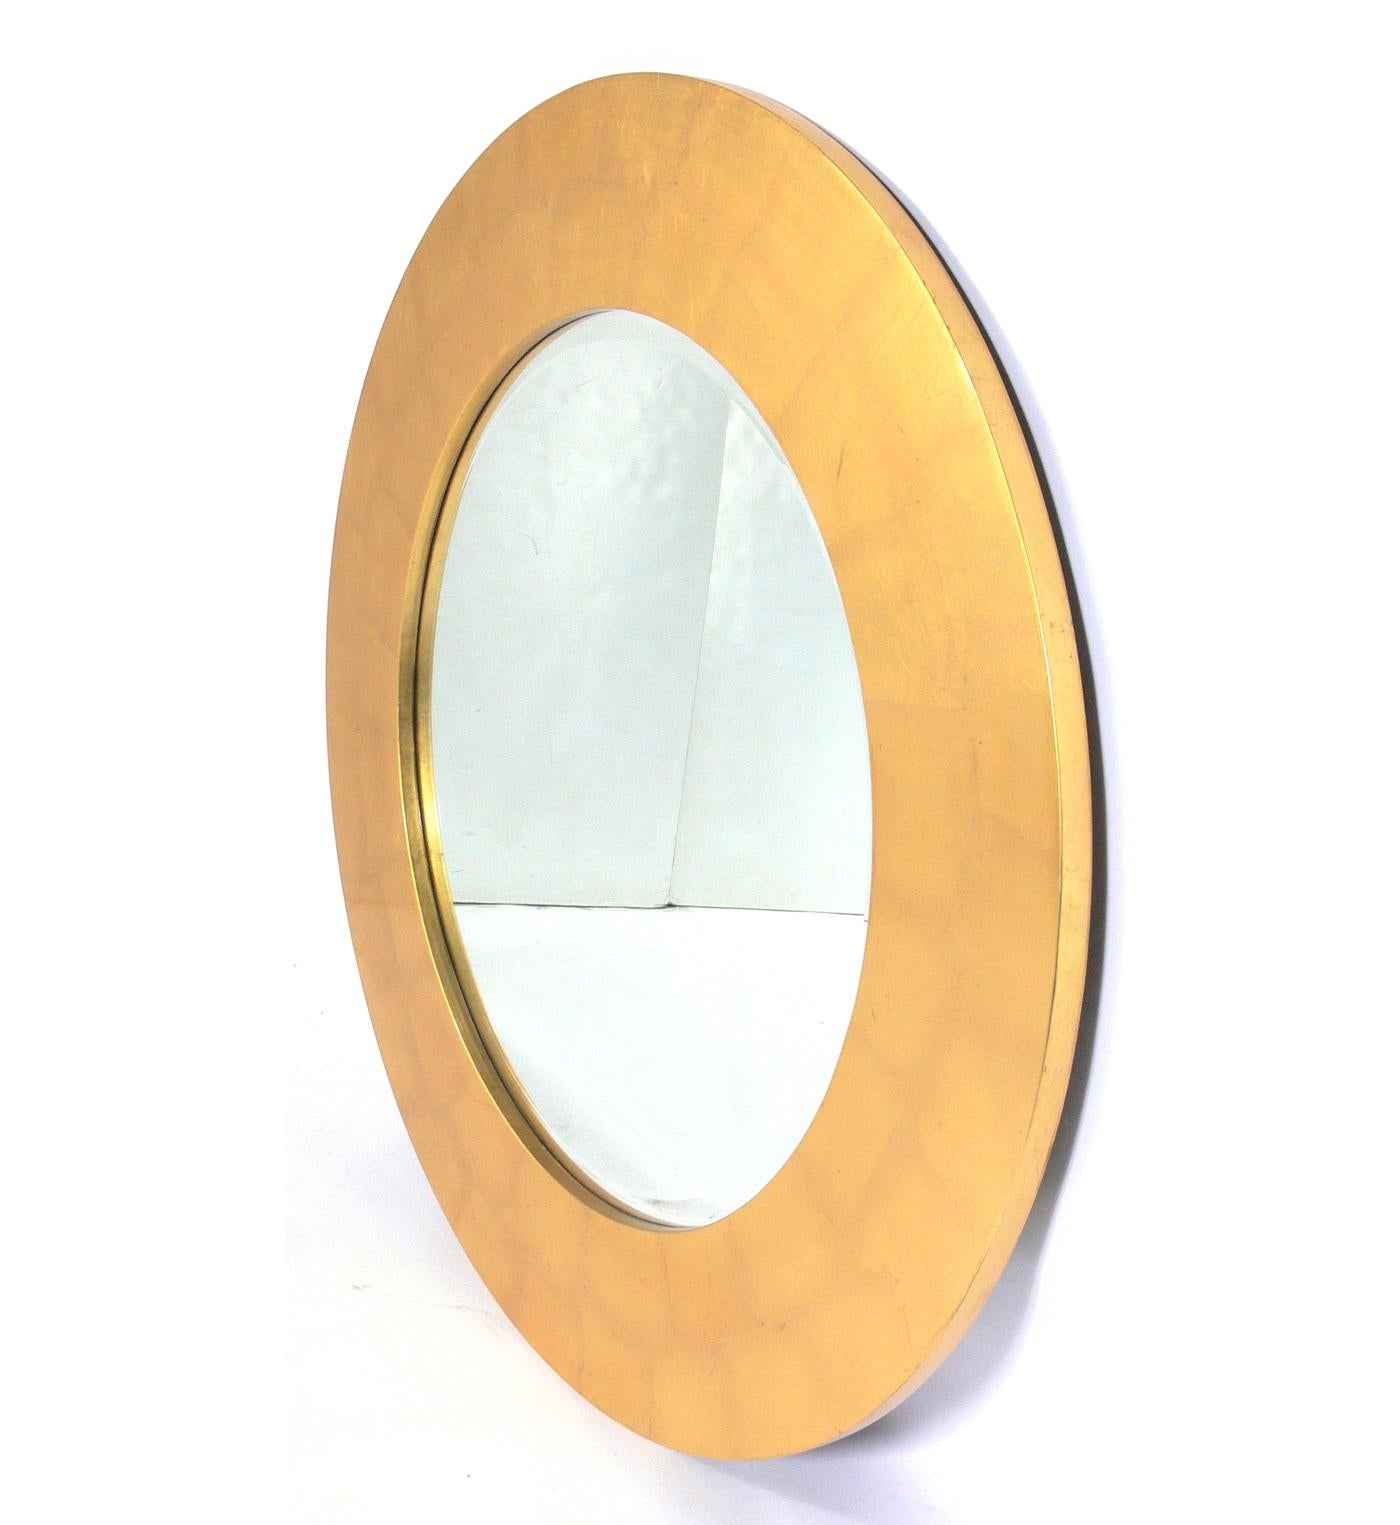 Large scale gold leaf circle mirror, American, circa 1980s. It measures an impressive 48